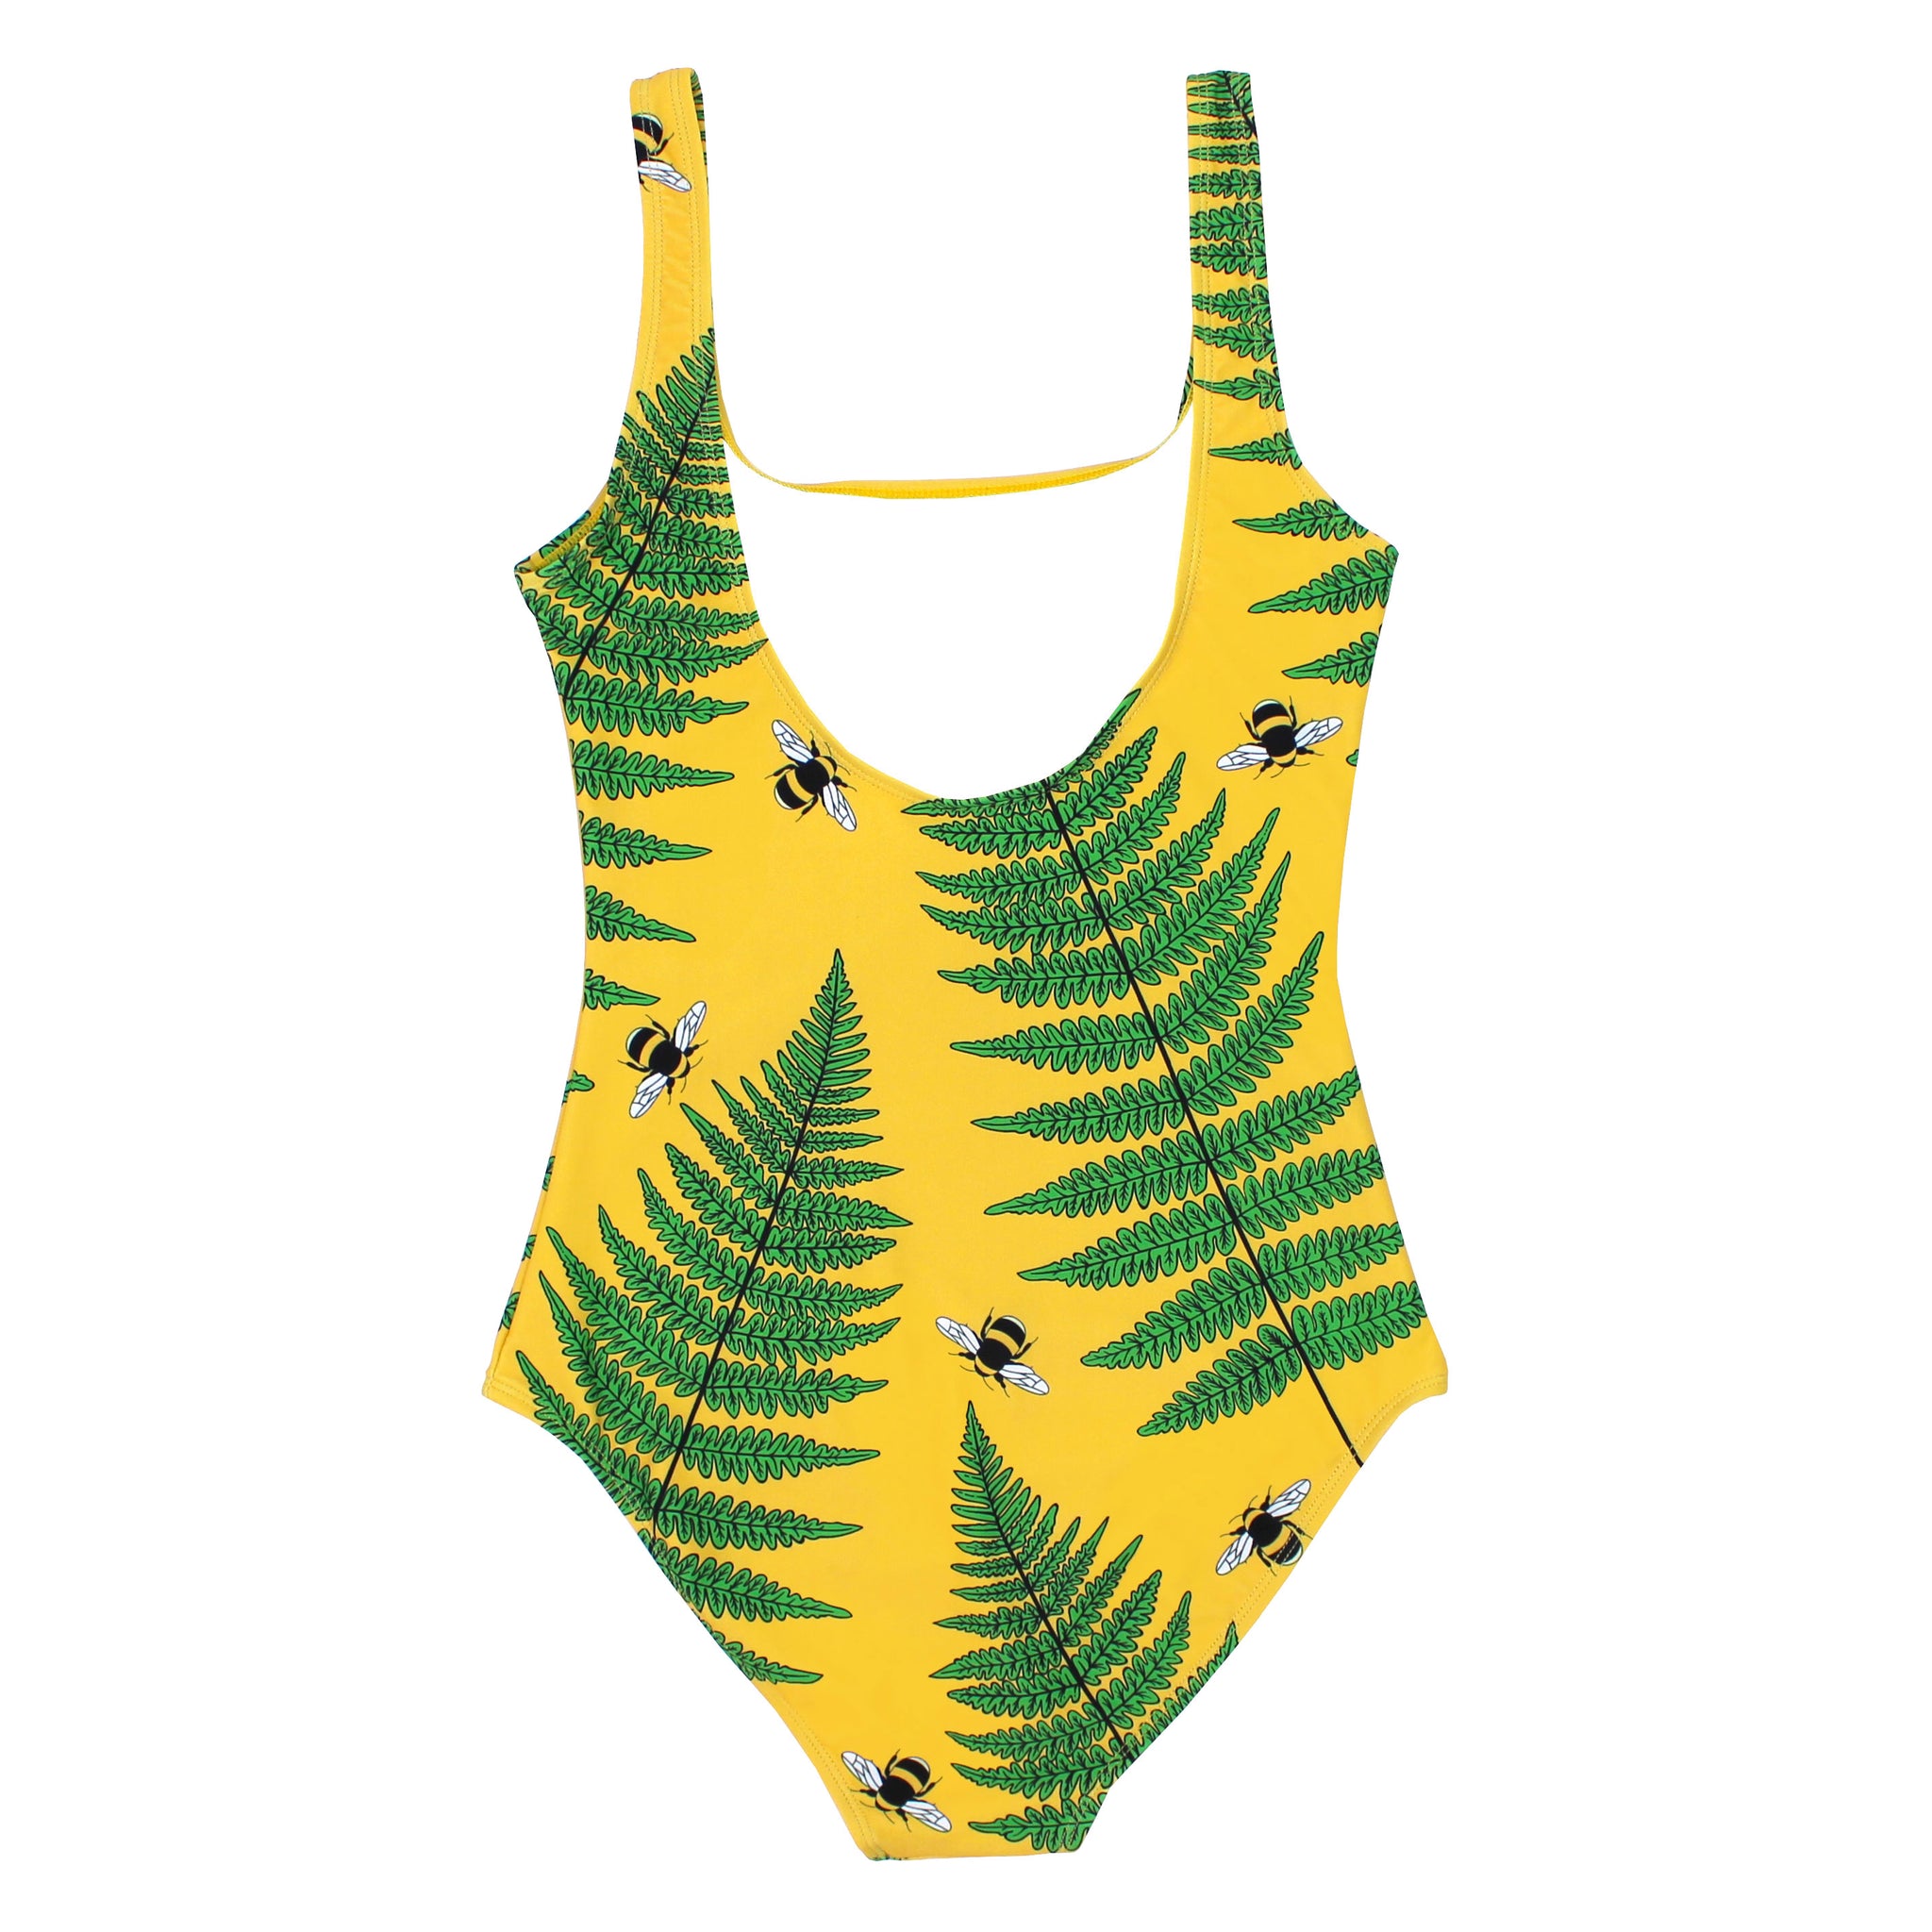 Batoko Fern Swimsuit Made From Recycled Plastic Waste (Back)